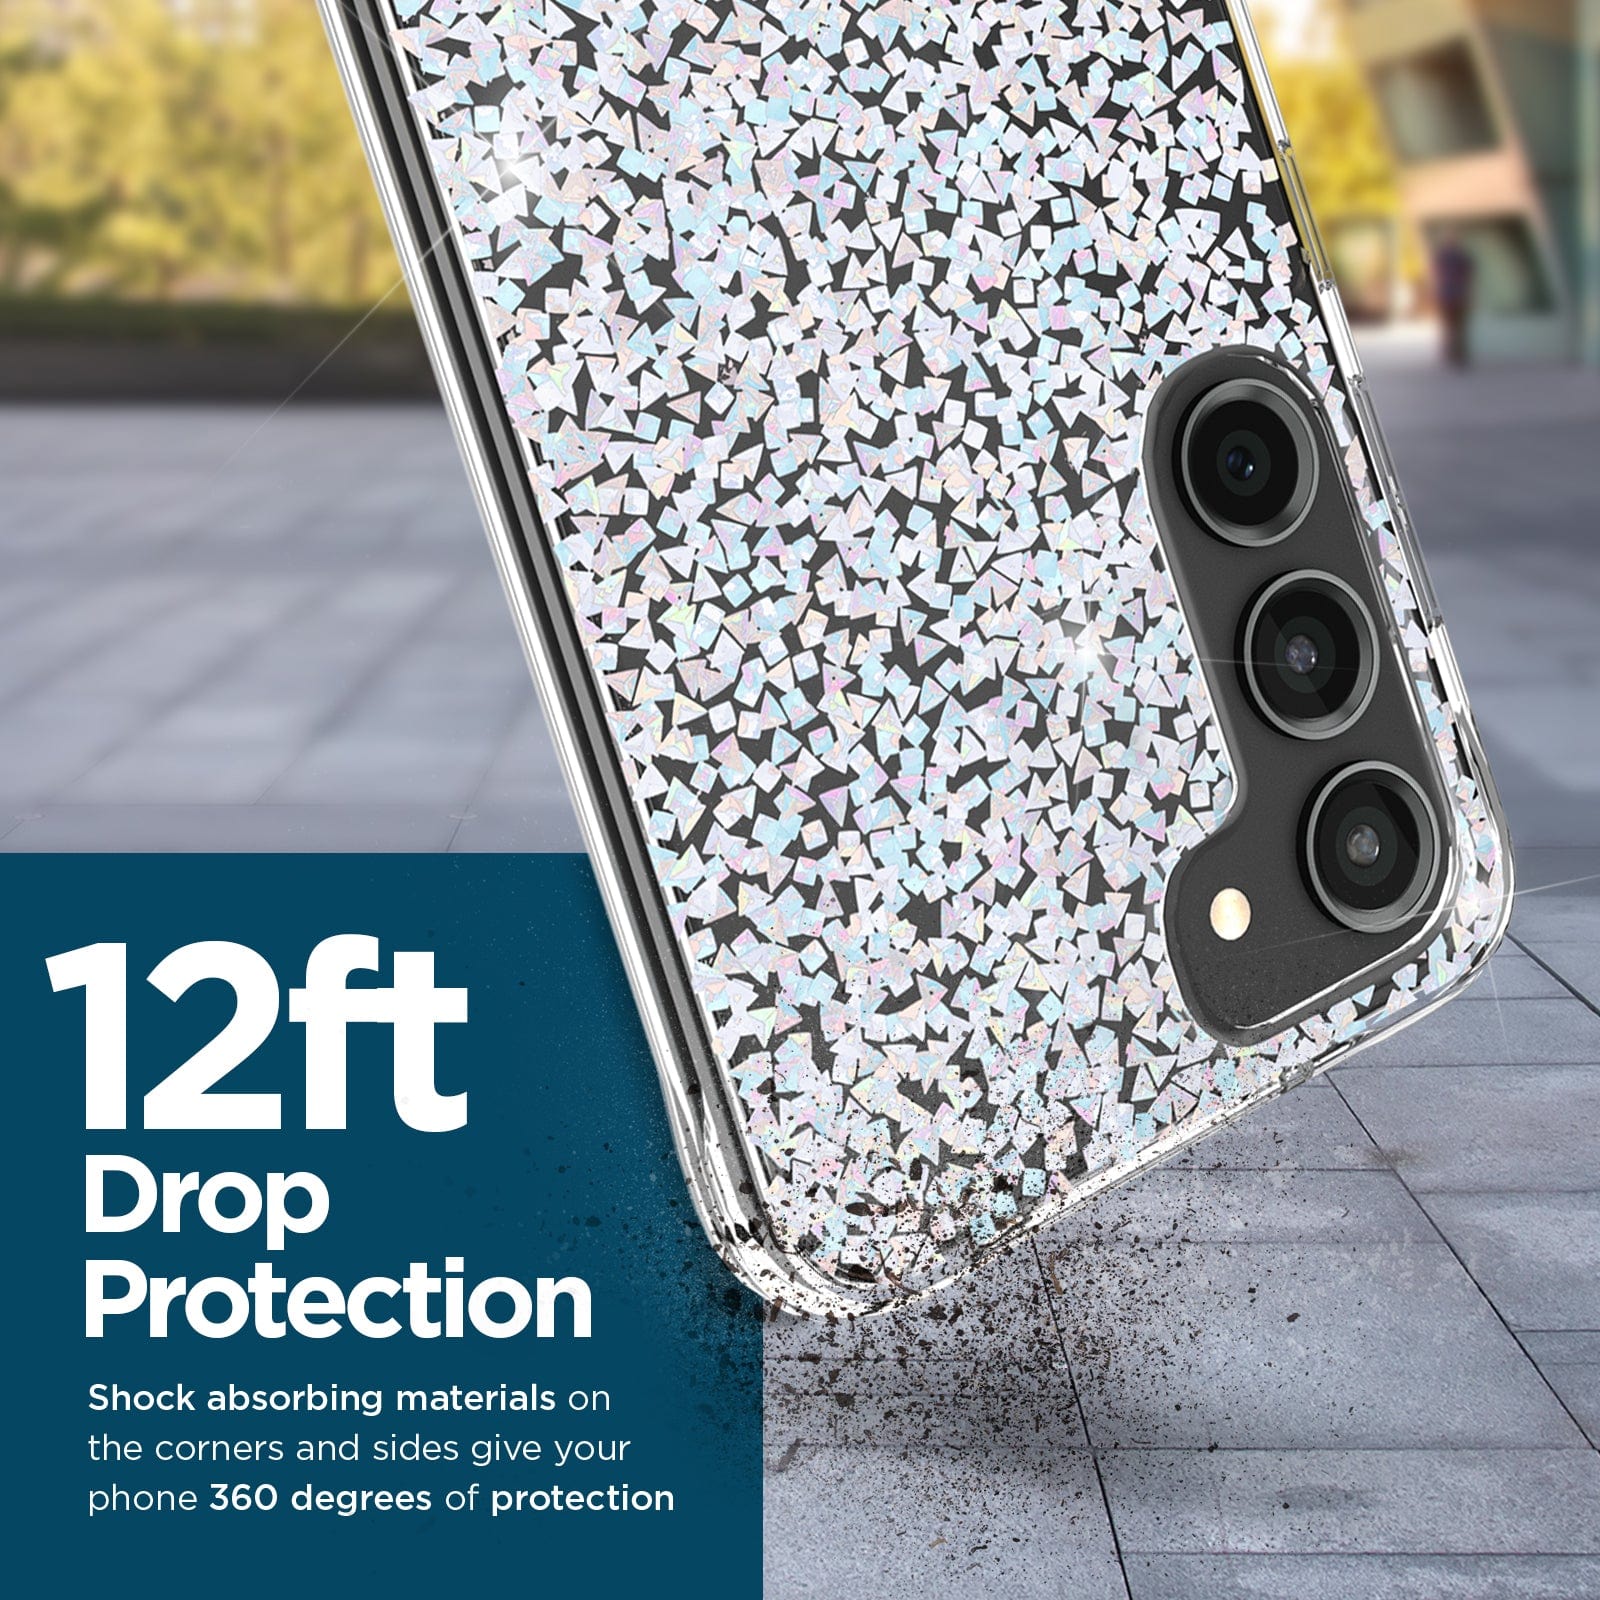 12ft DROP PROTECTION. SHOCK ABSORBING MATERIALS ON THE CORNERS AND SIDES GIVE YOUR PHONE 360 DEGREES OF PROTECTION.